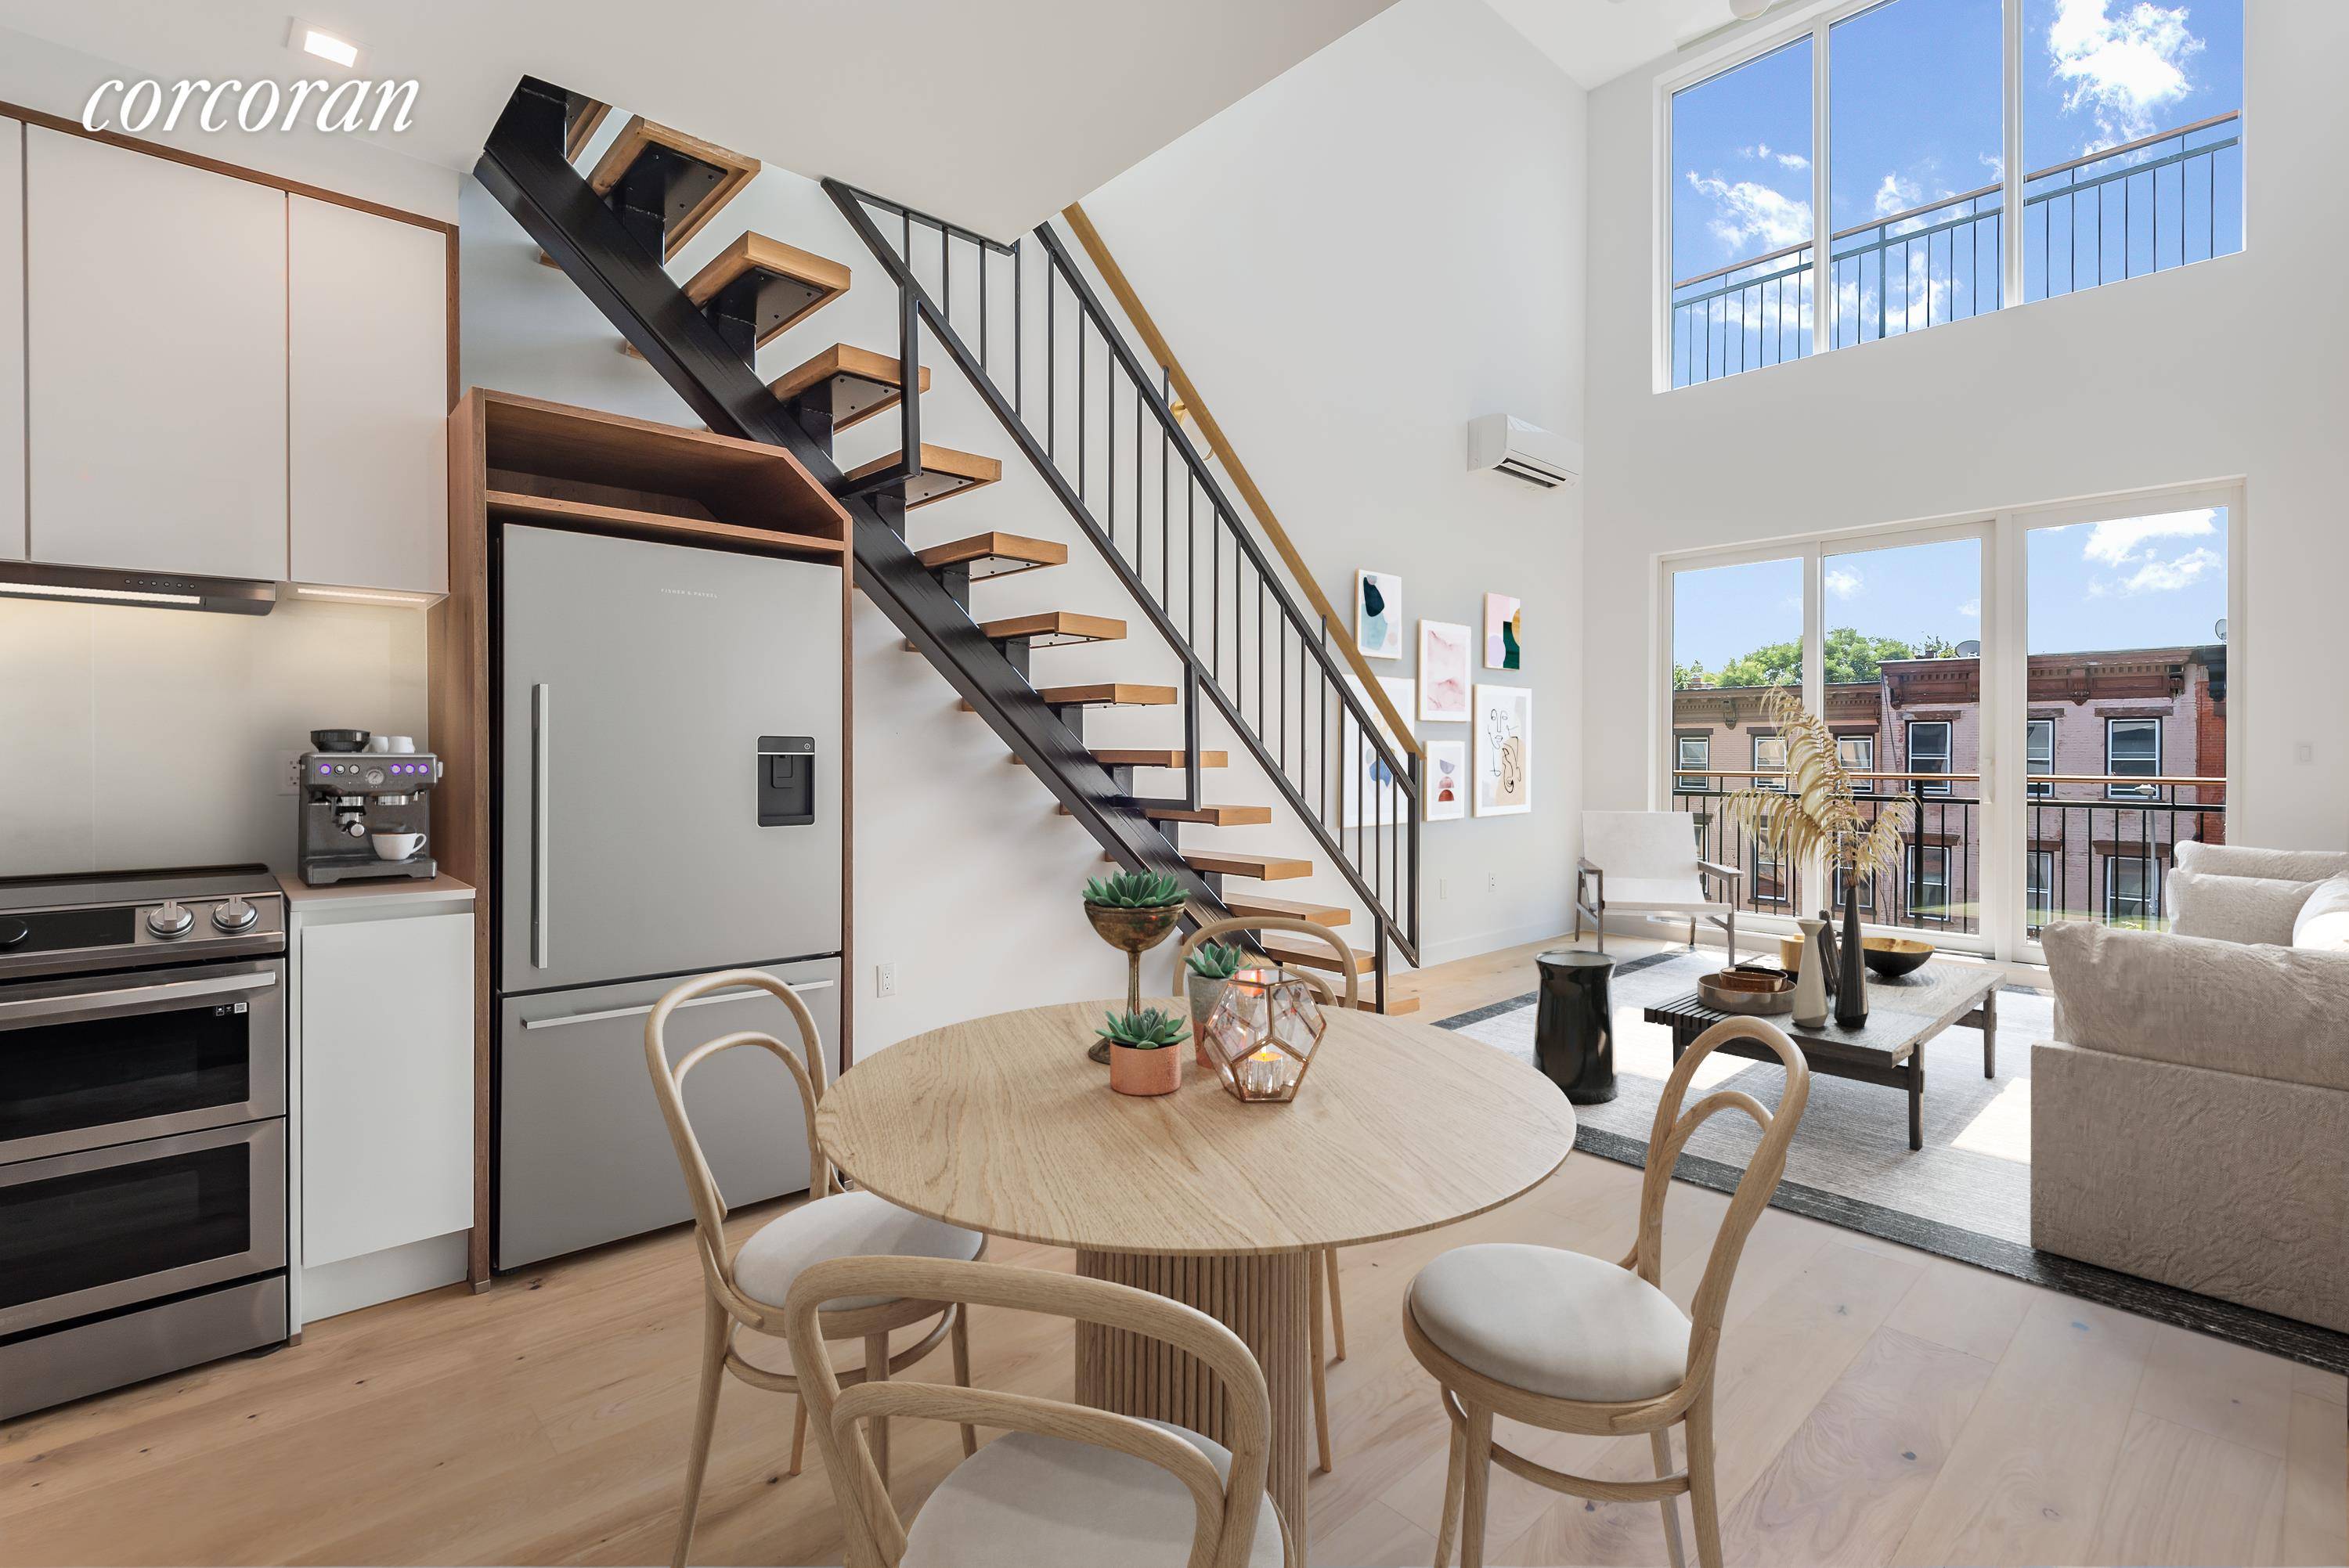 Meet 197 Quincy Street, a thoughtfully designed modern condominium building in prime Bedford Stuyvesant.